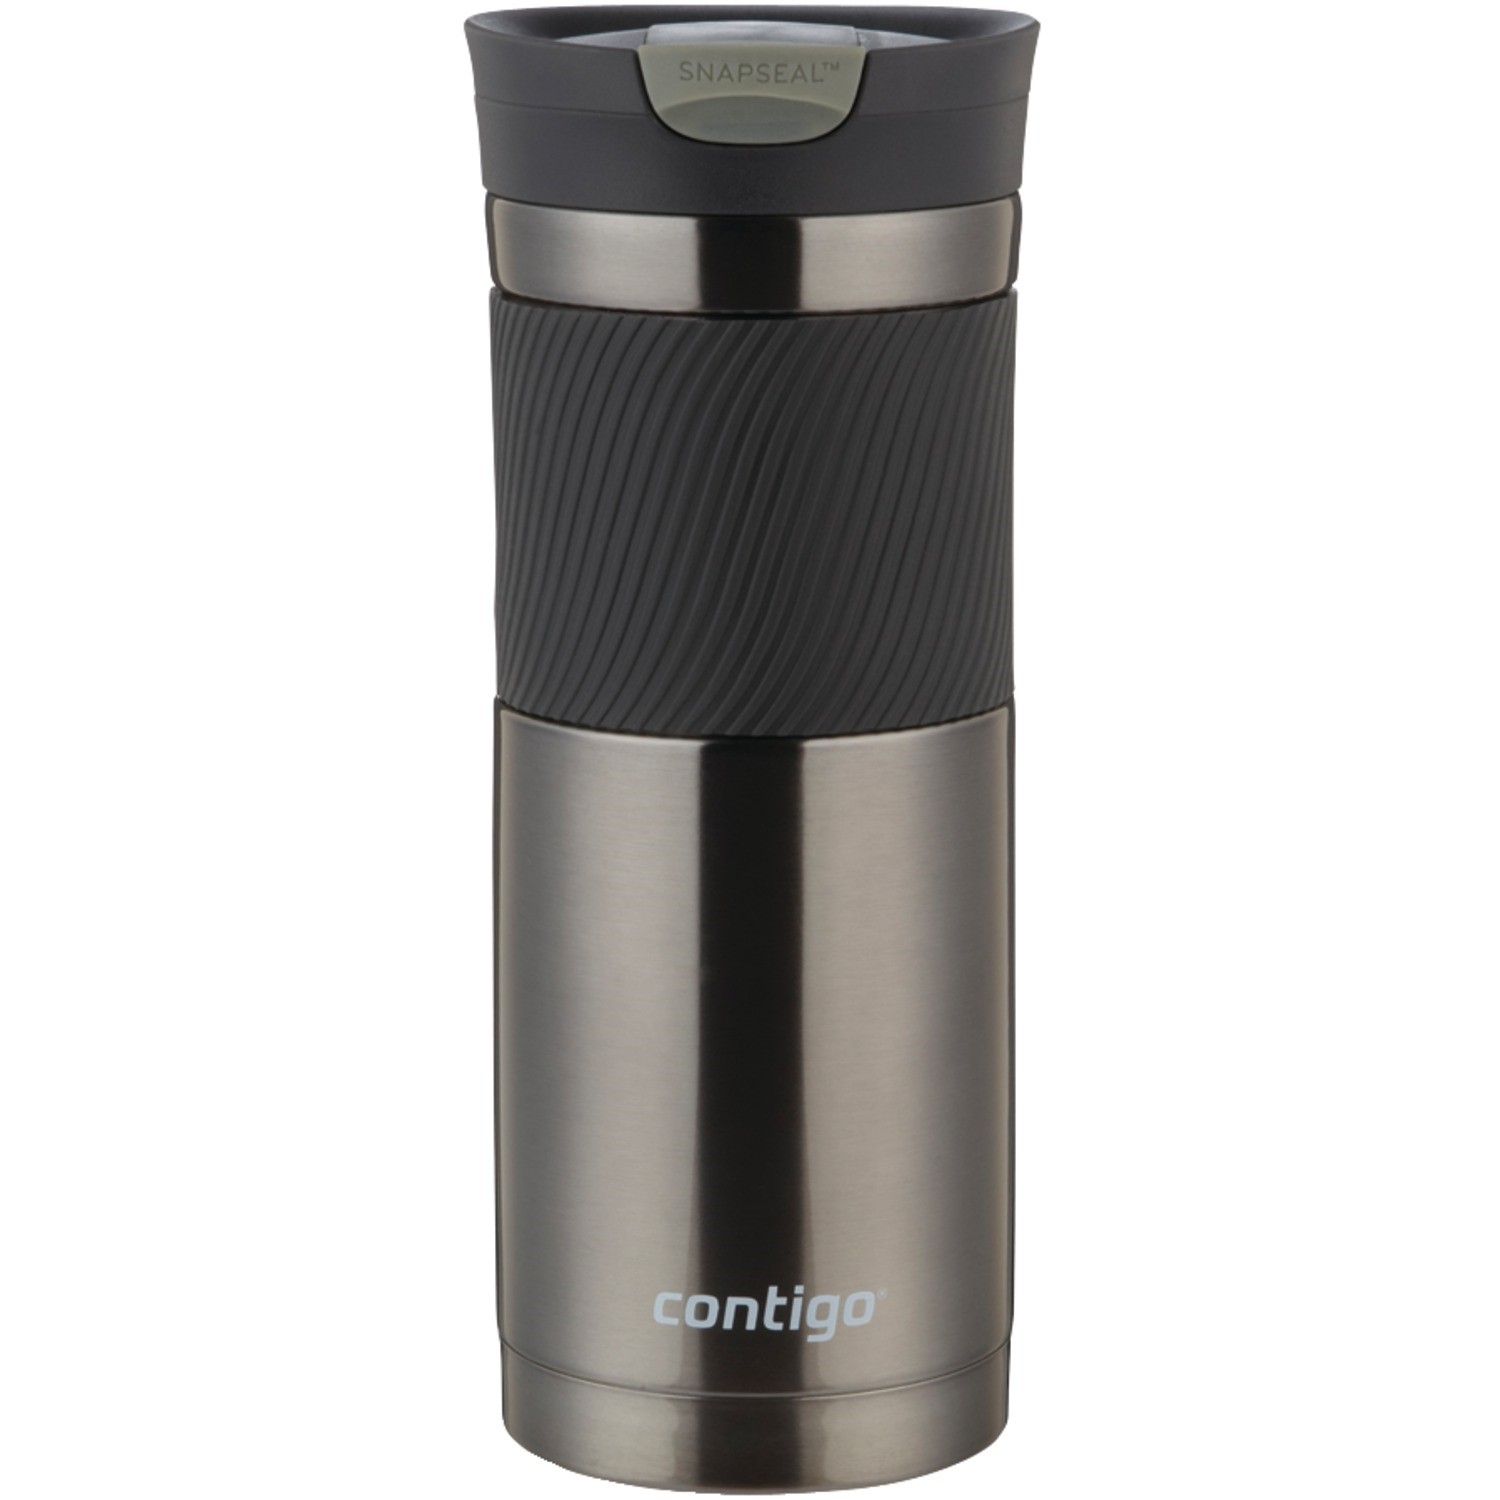 Contigo Byron SnapSeal - Thermal cup - Size 3.15 in - Height 8.1 in - 20 fl.oz - gunmetal - image 1 of 5